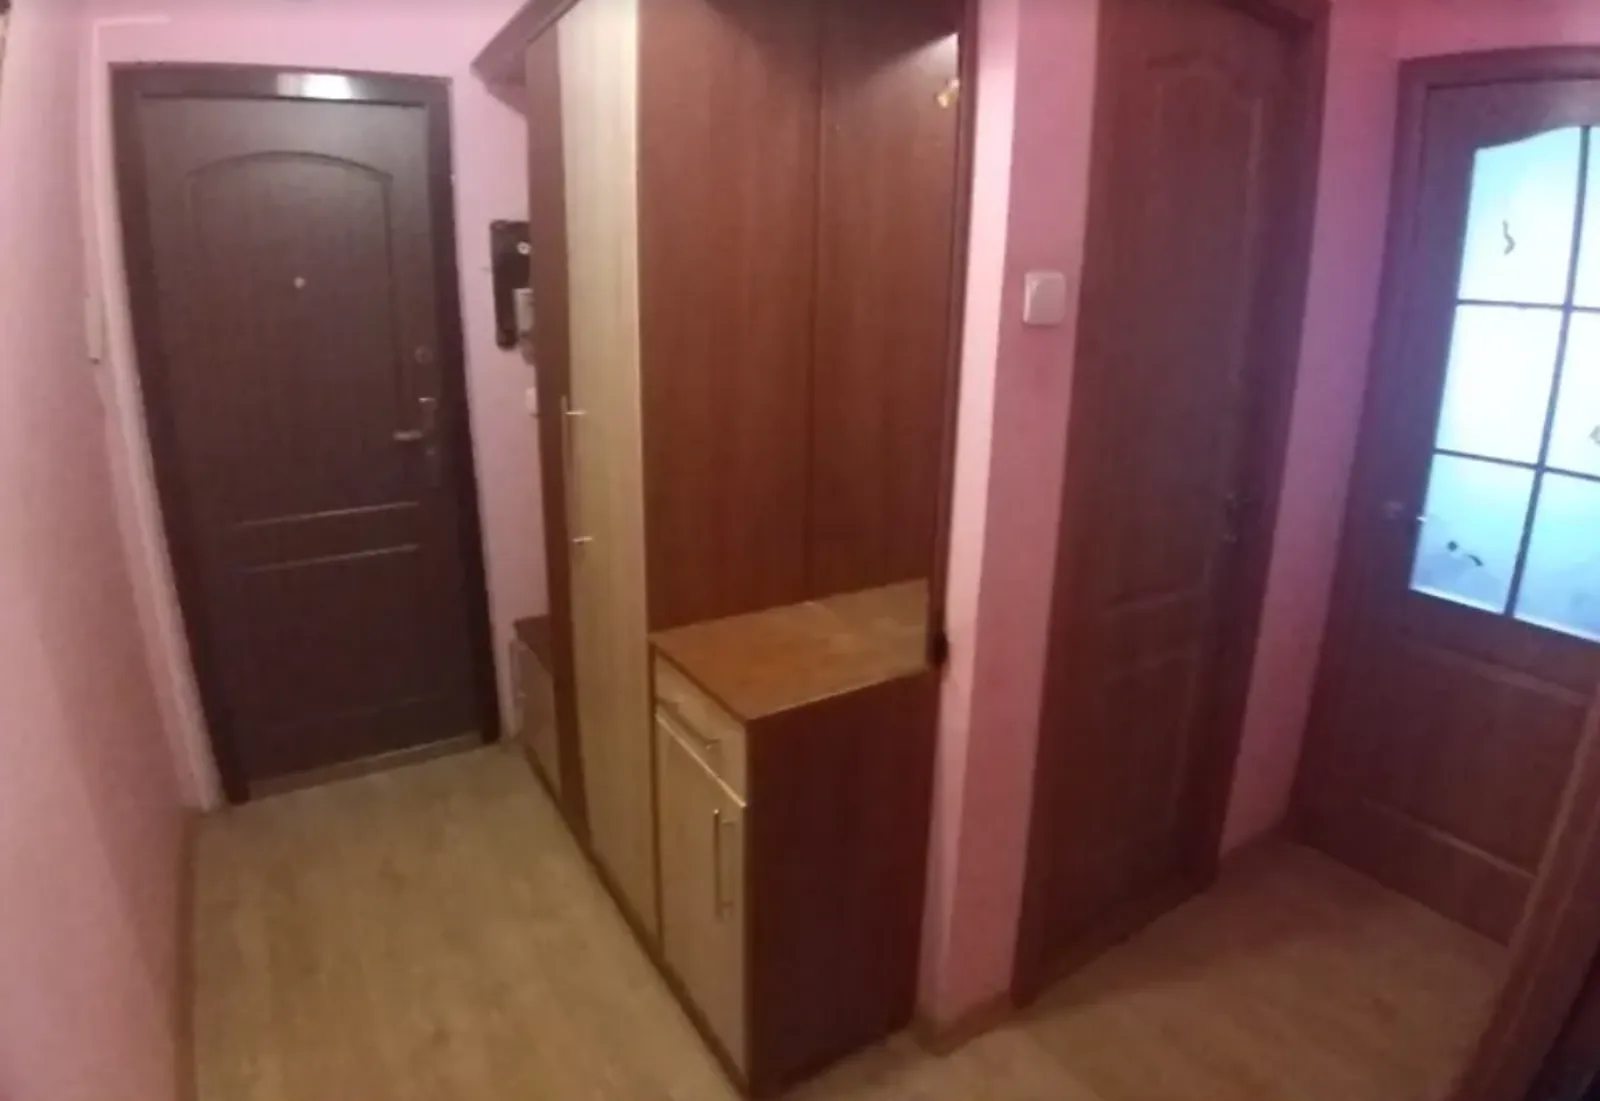 Apartments for sale. 3 rooms, 49 m², 4th floor/5 floors. Vostochnyy, Ternopil. 